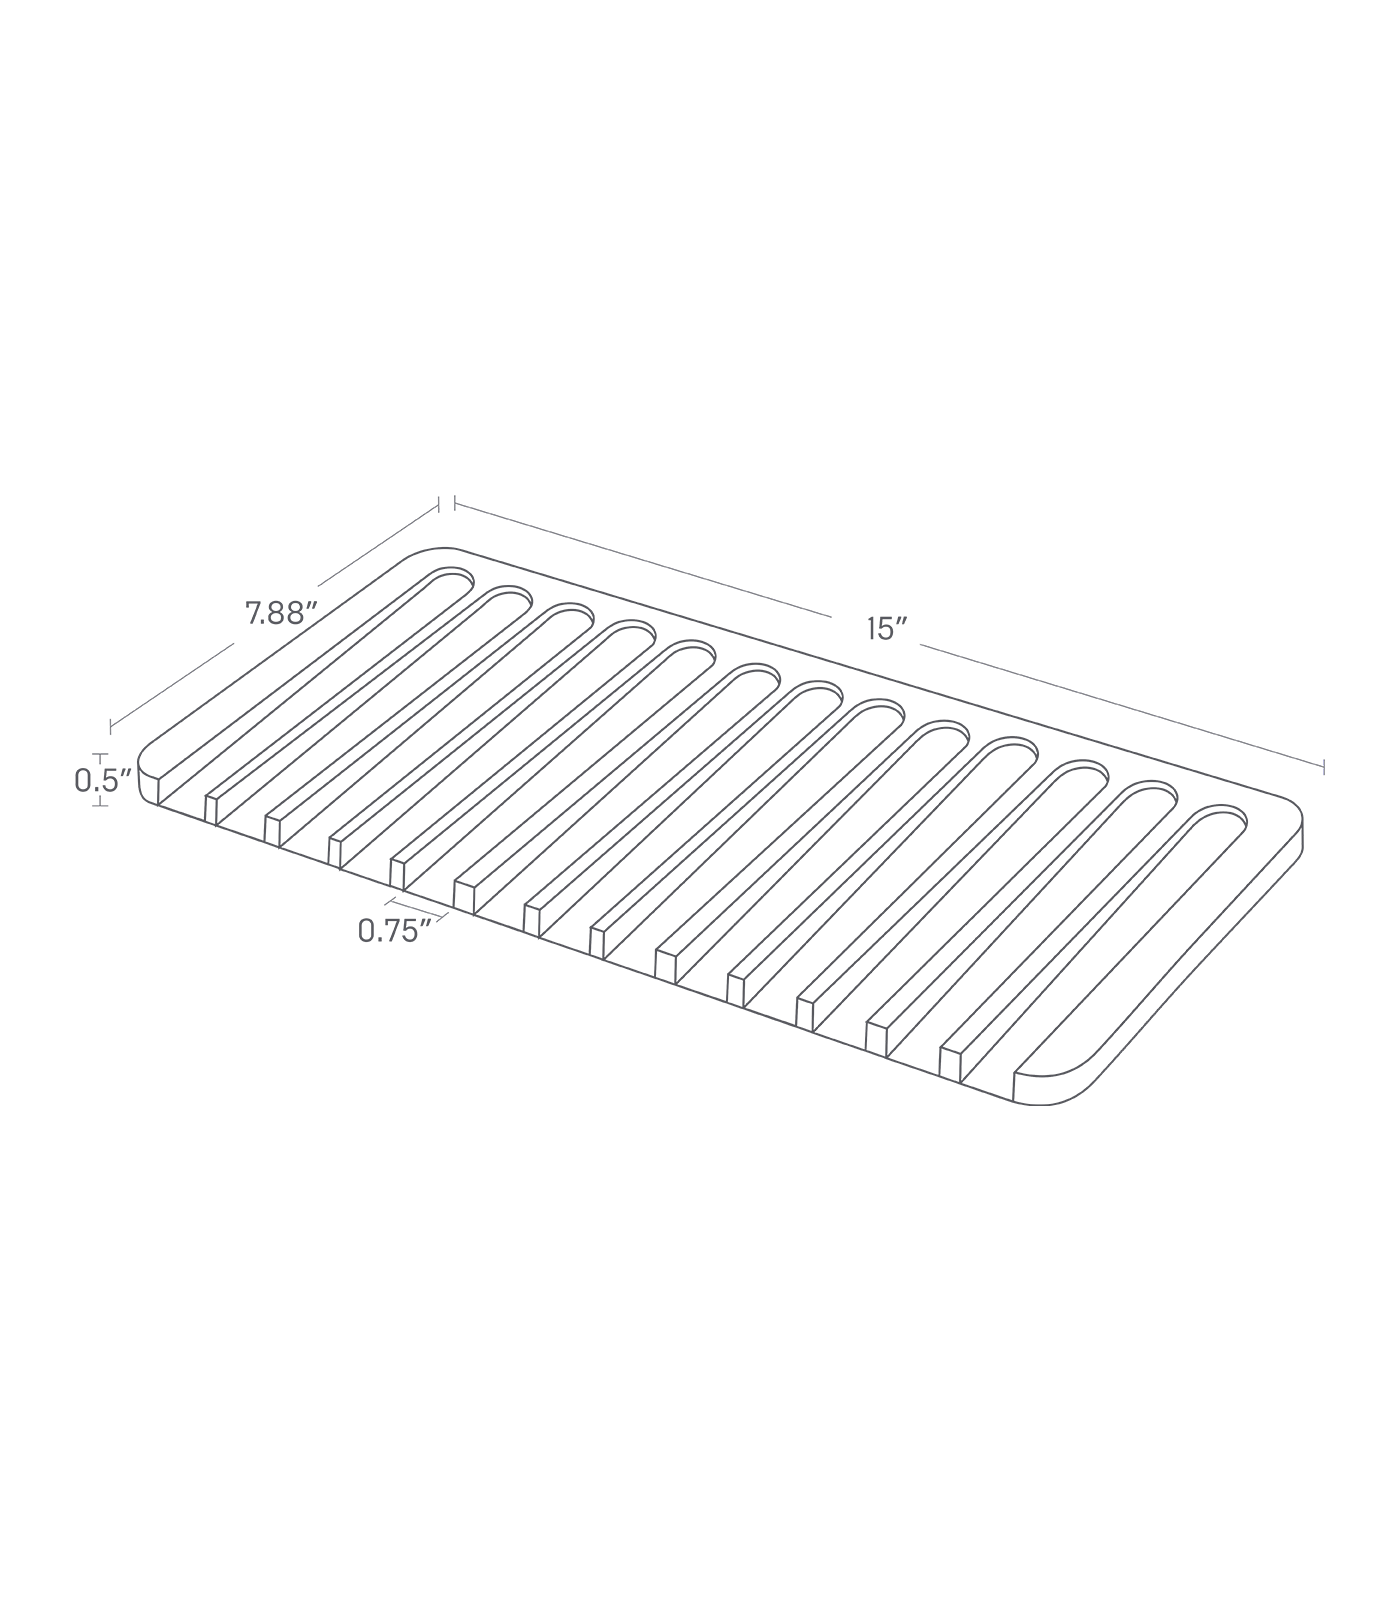 Dimension image for Dish Drainer Tray on a white background including dimensions  L 7.87 x W 14.96 x H 0.47 inches